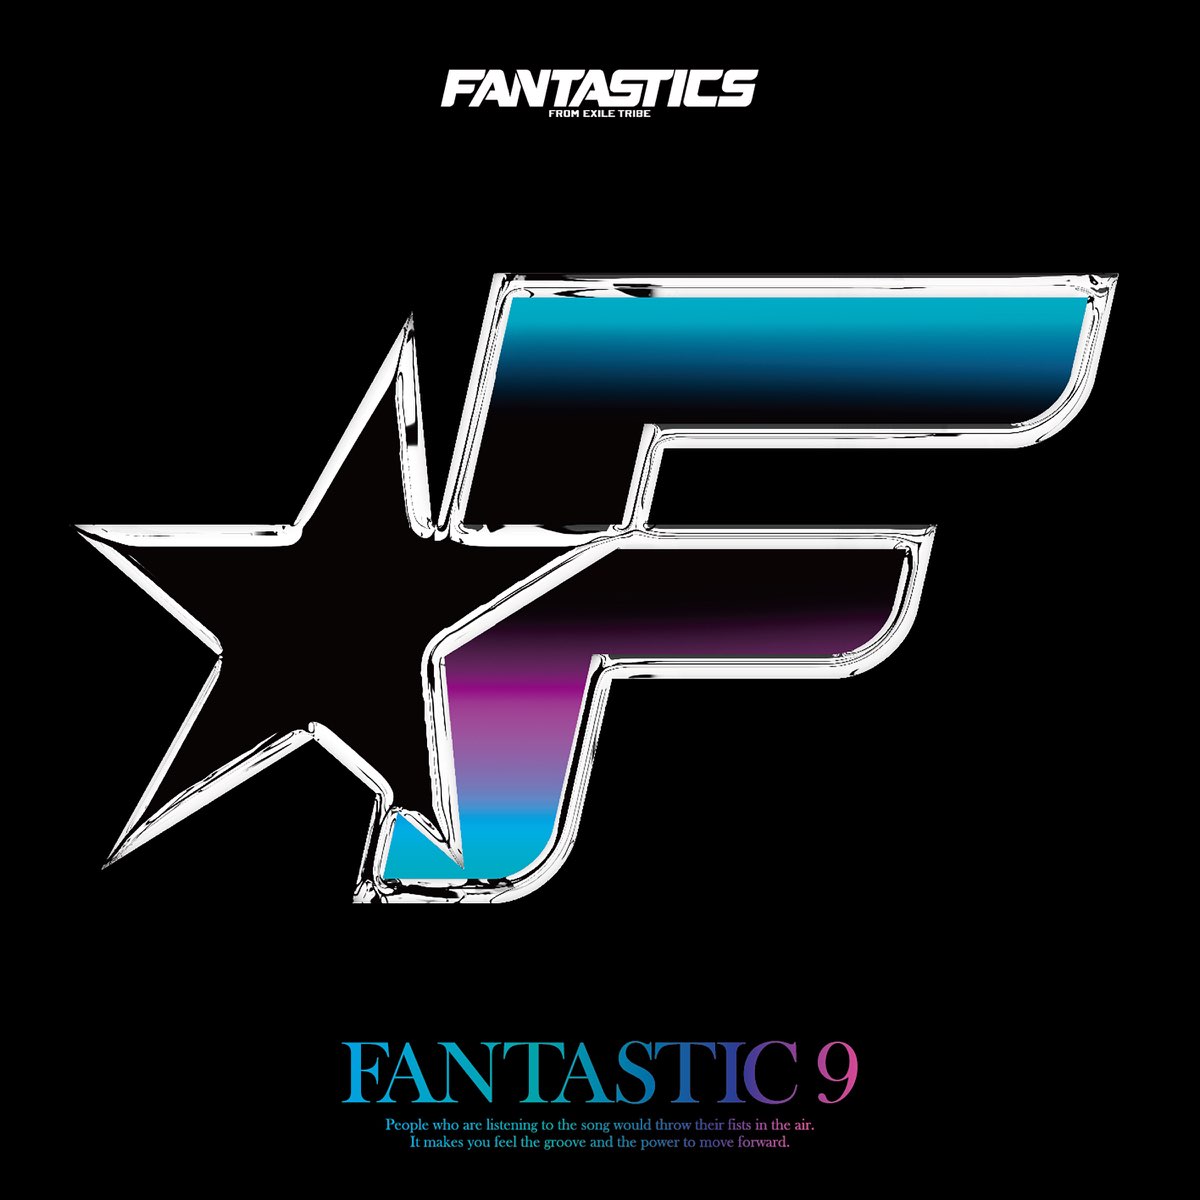 FANTASTIC 9 - Album by FANTASTICS from EXILE TRIBE - Apple Music